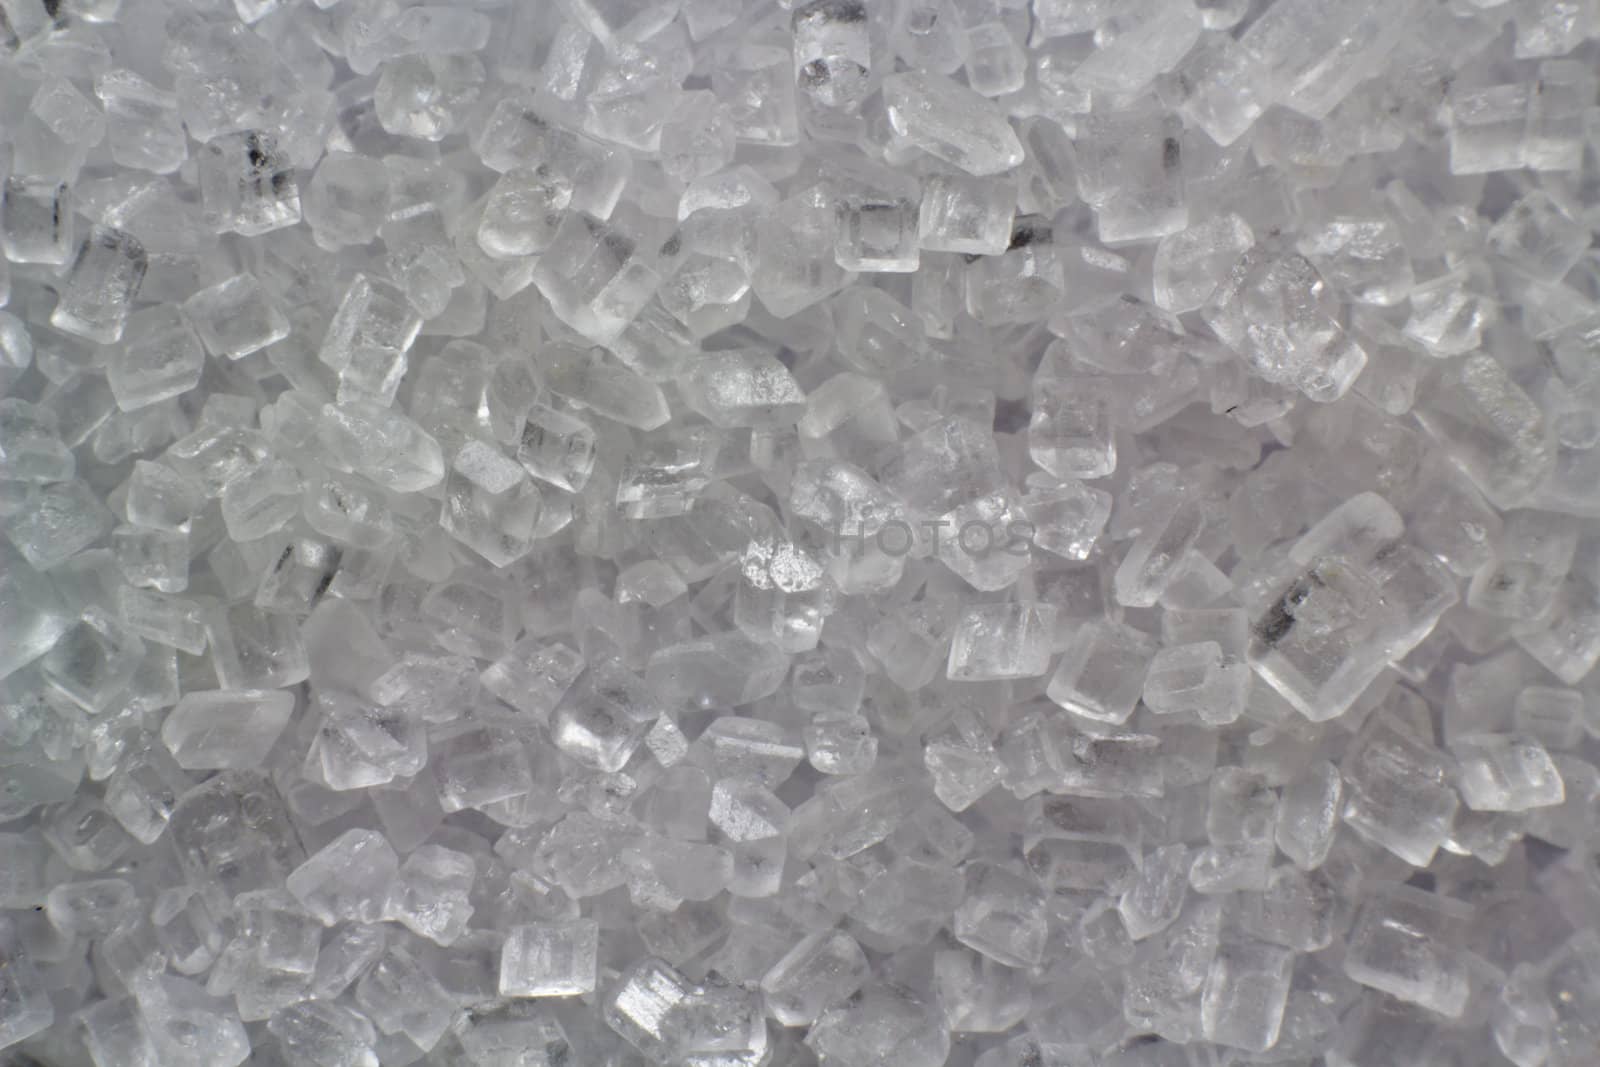 A macro picture of a bunch of white sugar